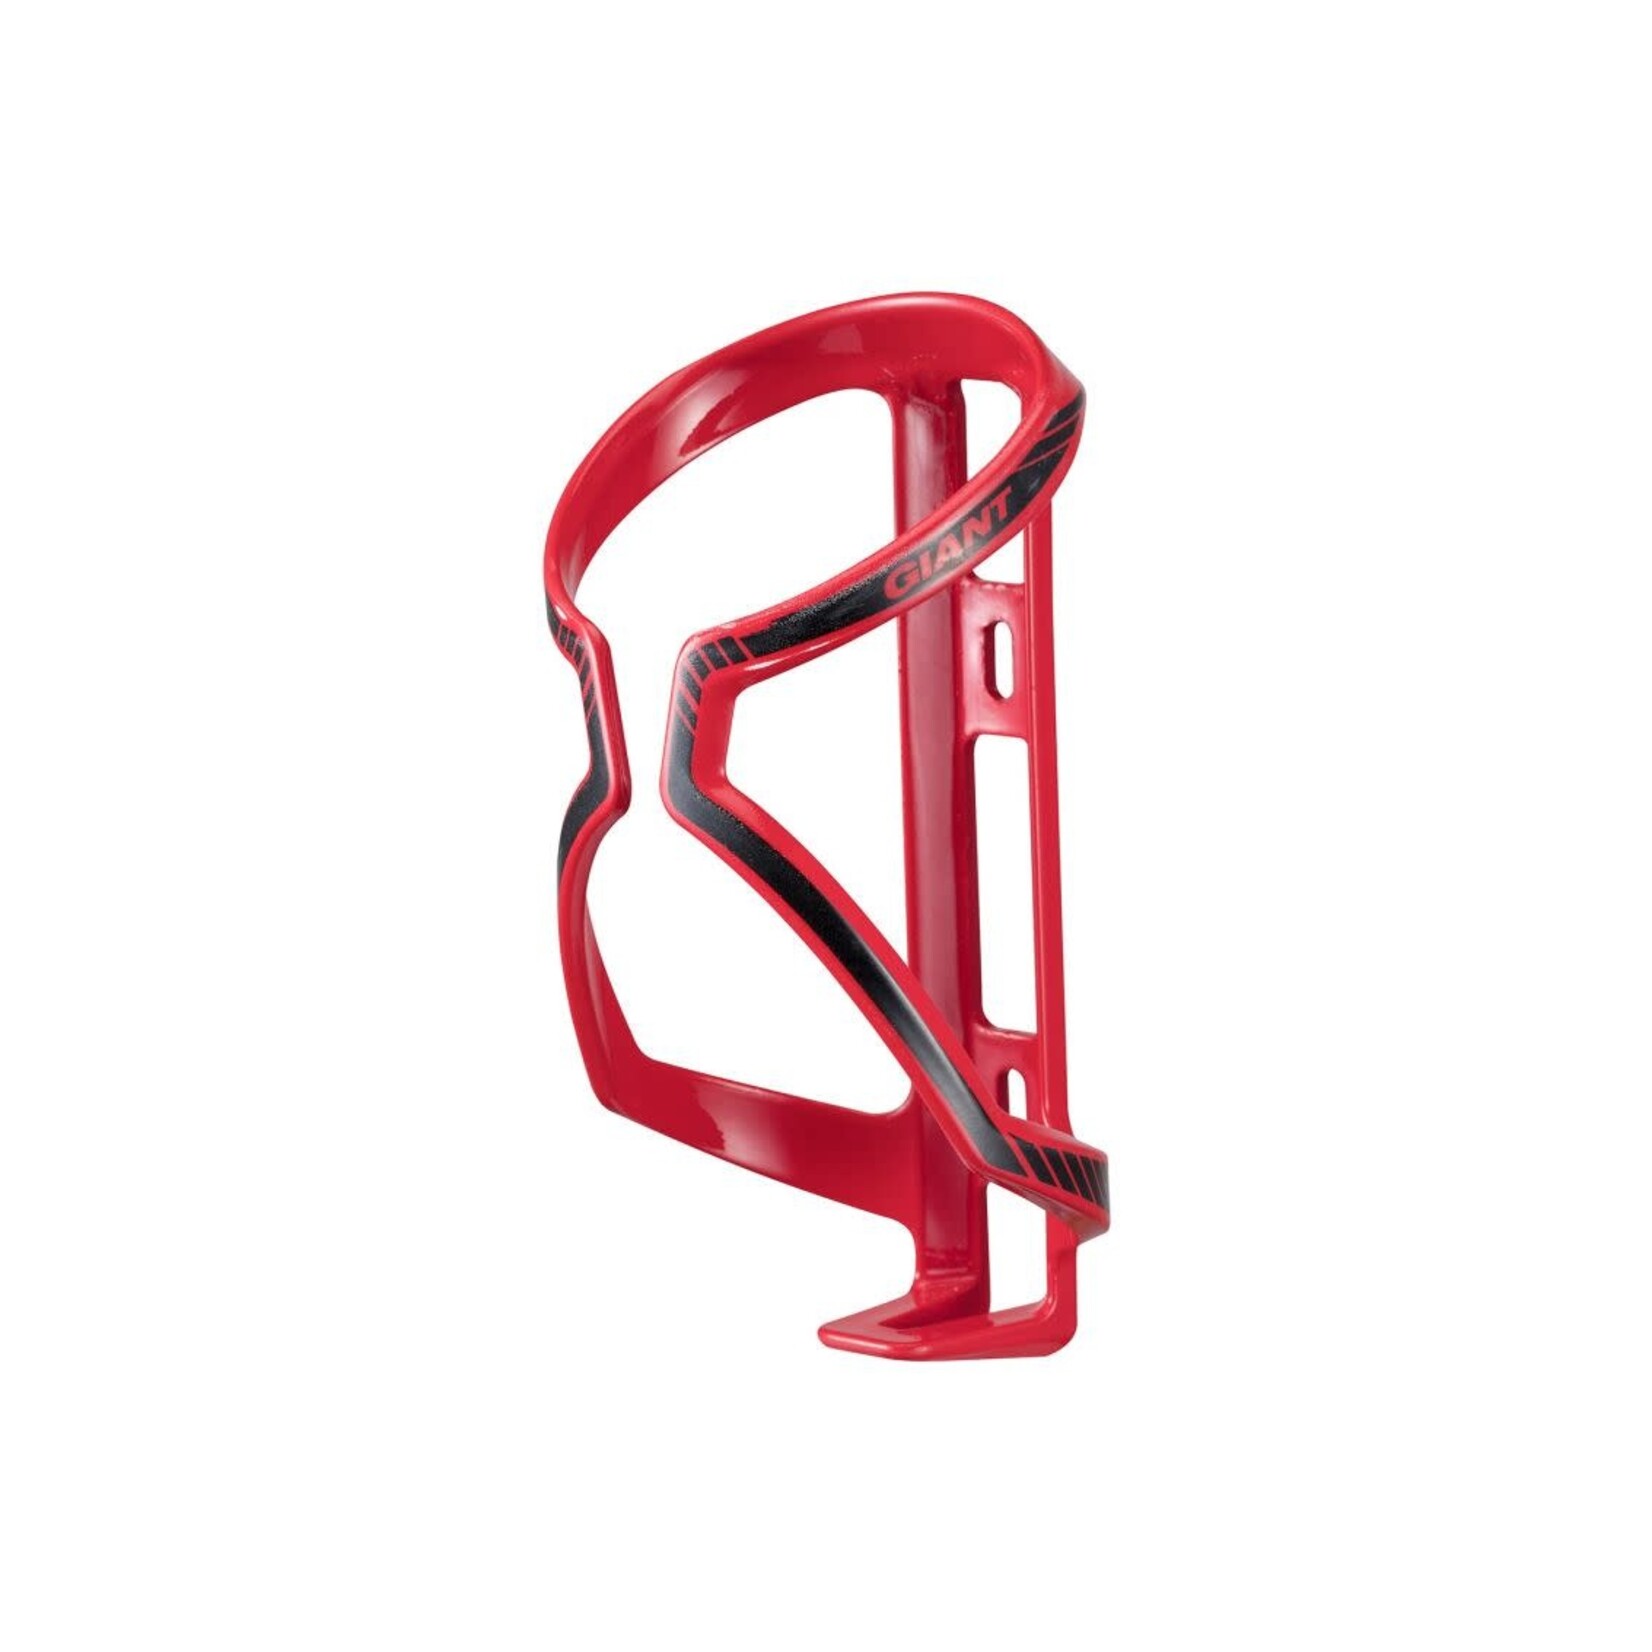 Giant Giant Airway Water Bottle Cage